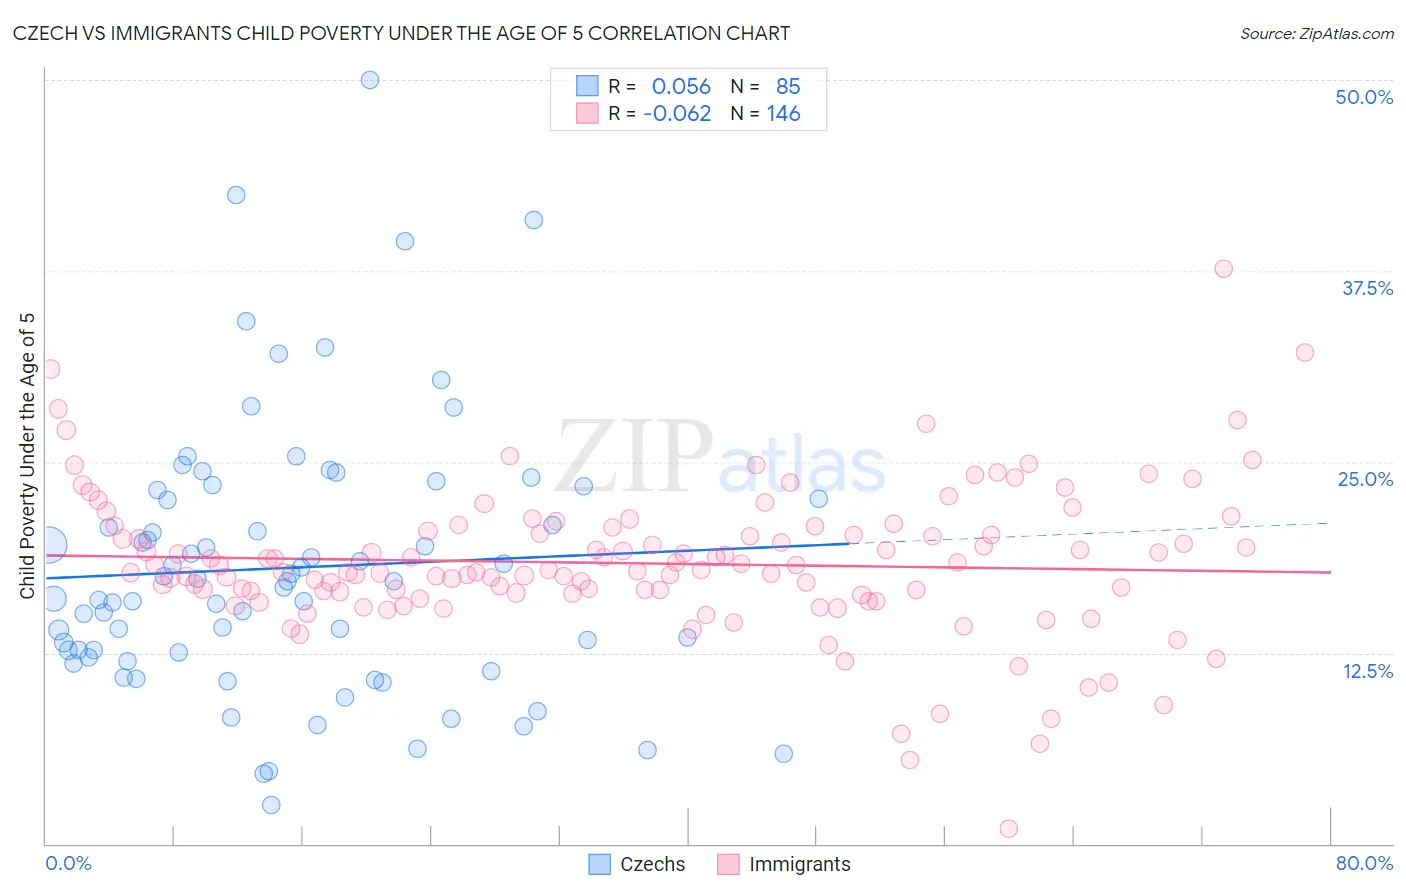 Czech vs Immigrants Child Poverty Under the Age of 5